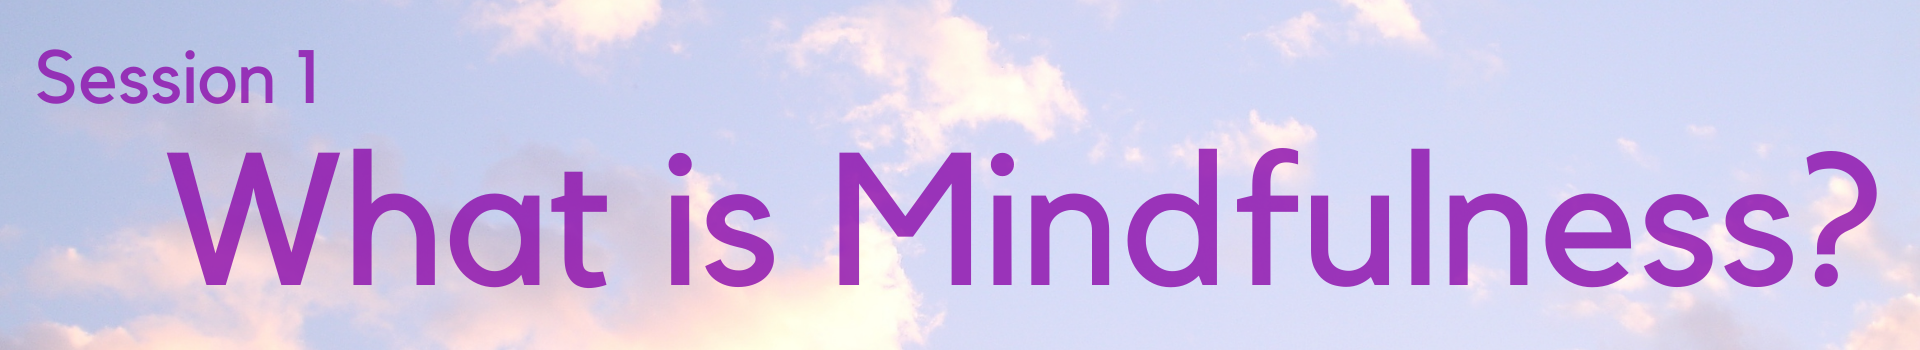 Session 1 - What is Mindfulness?